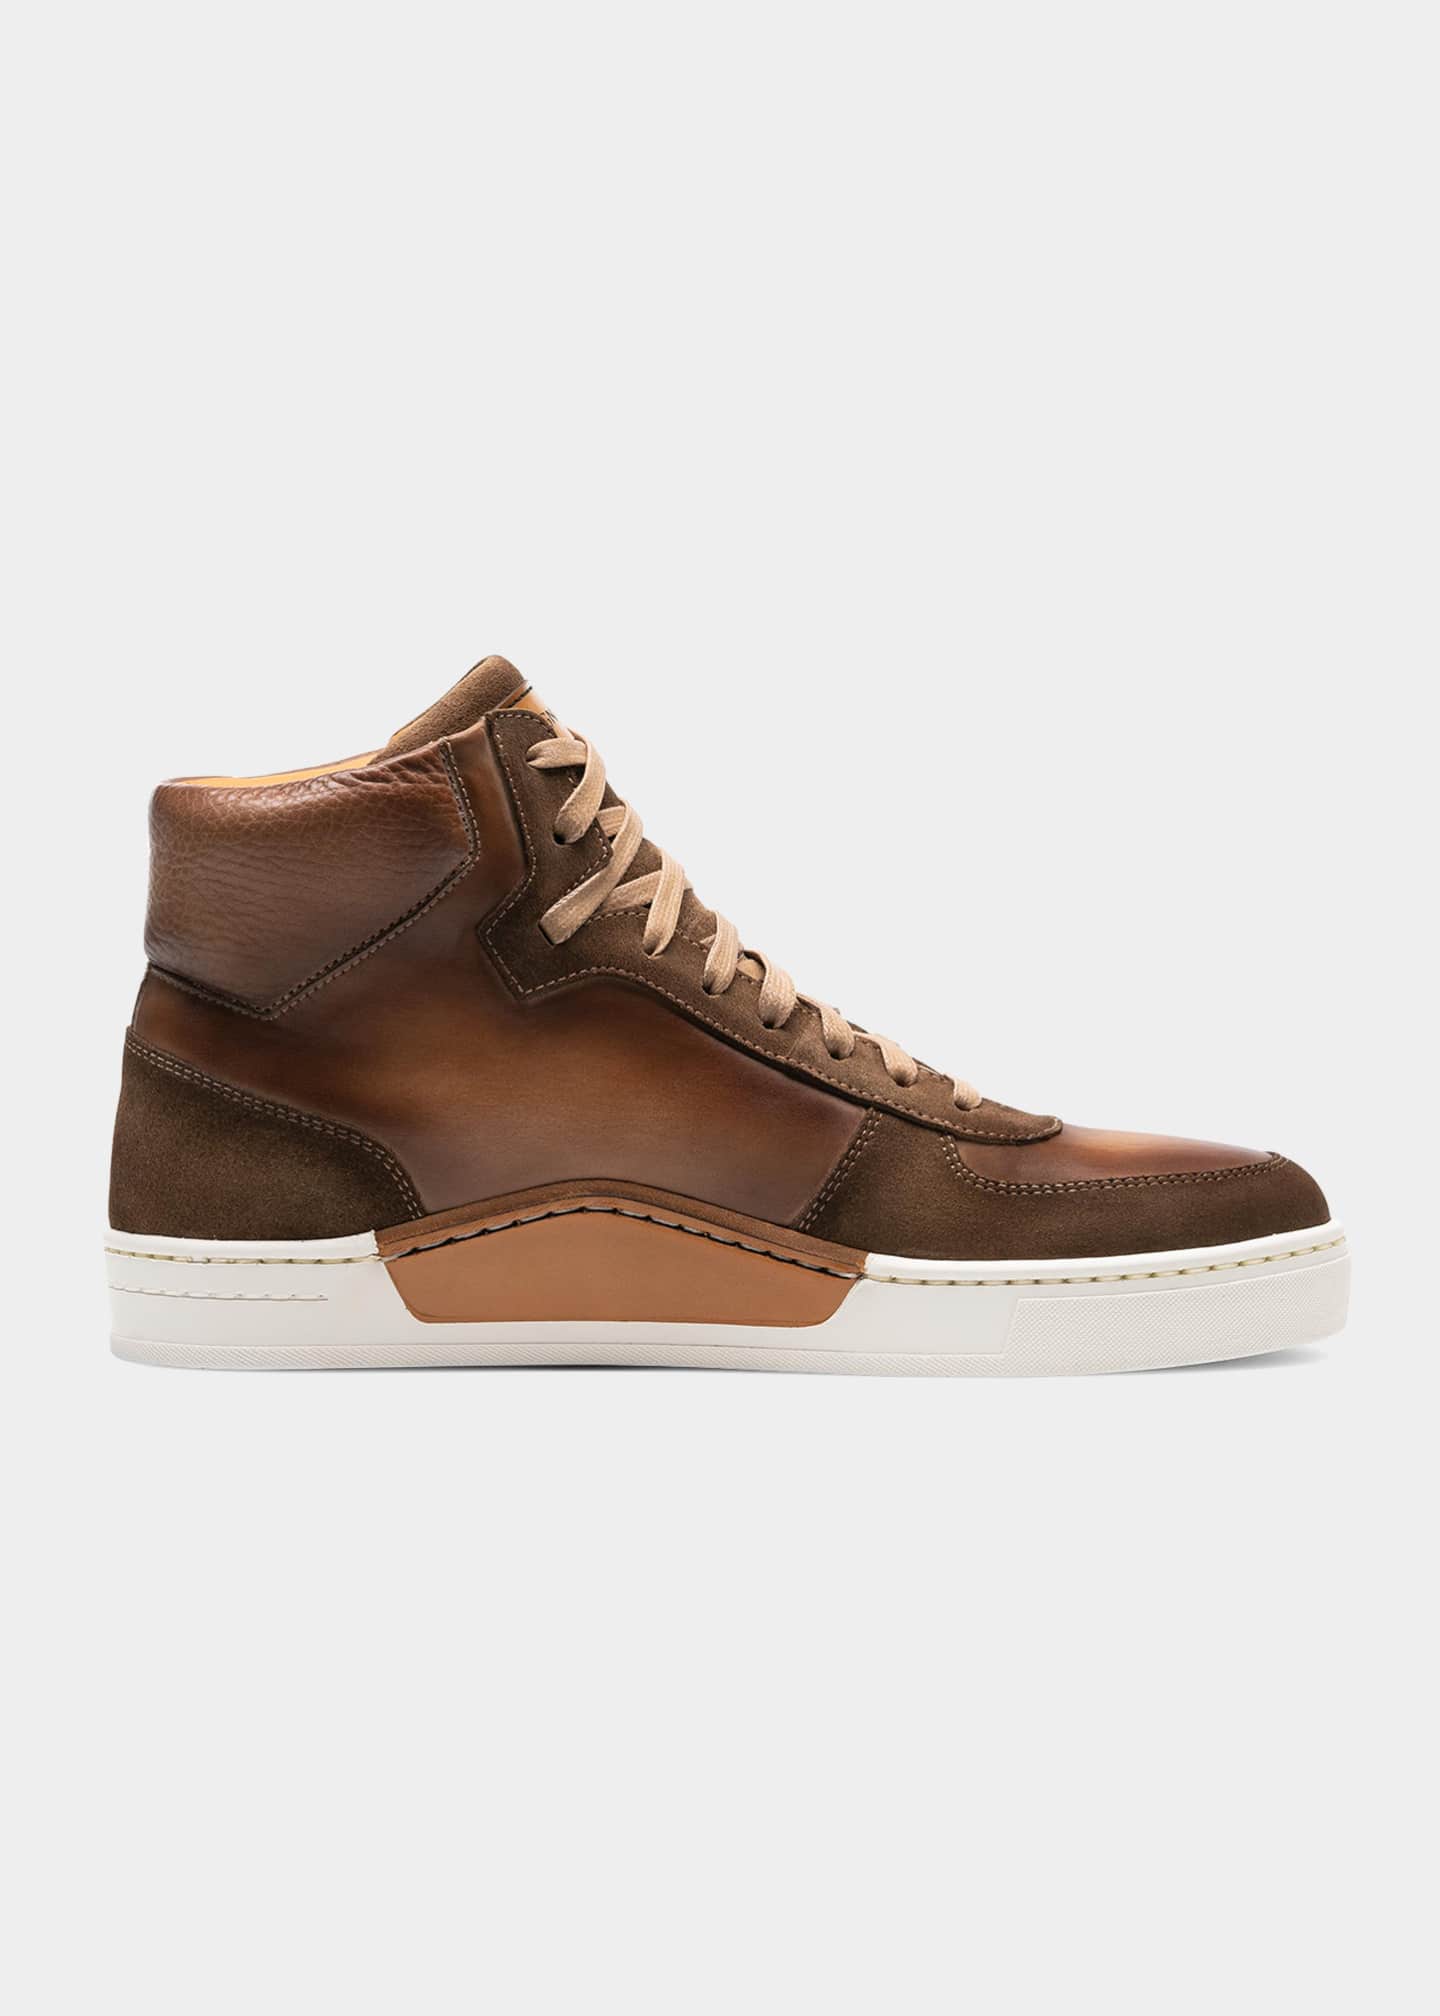 Magnanni Men's Rubio Leather & Suede High-Top Sneakers - Bergdorf Goodman